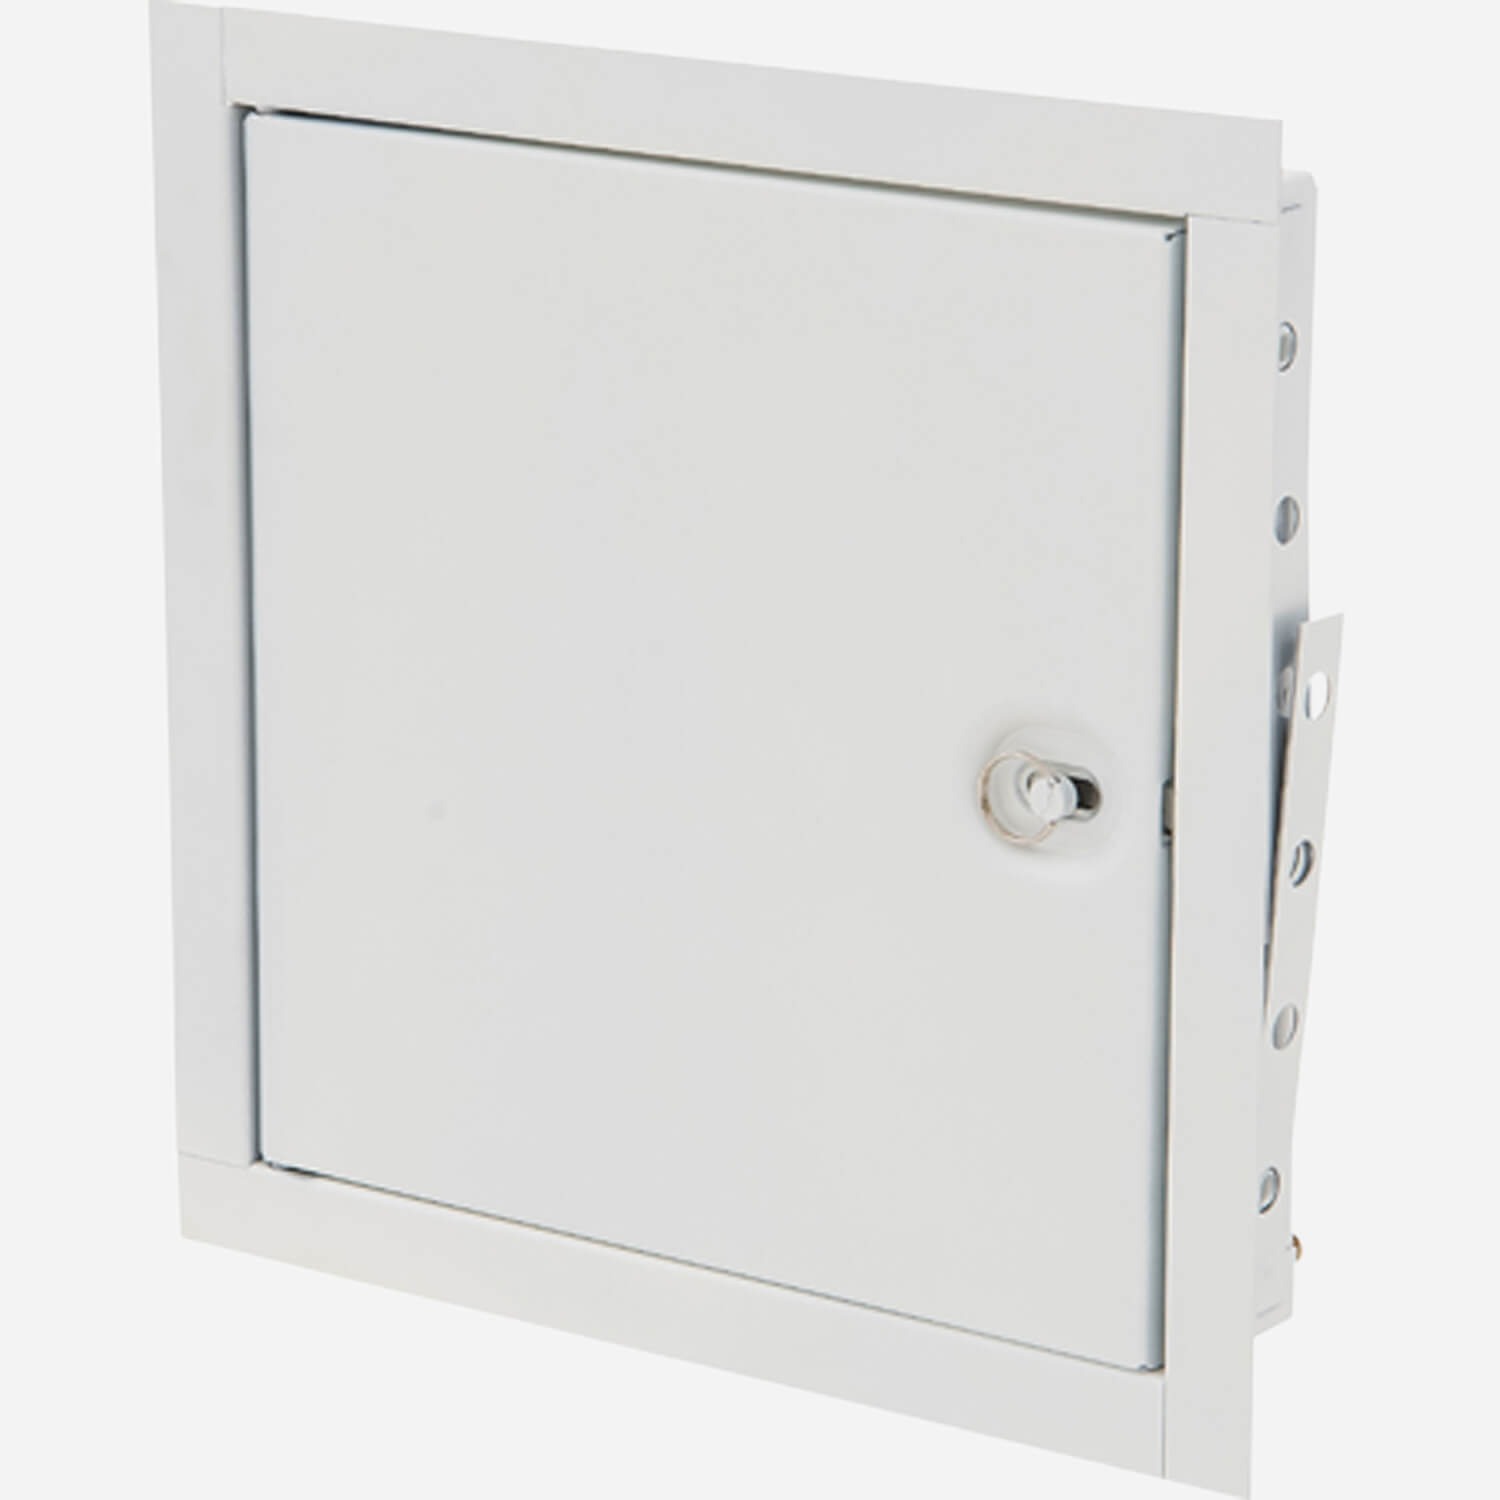 Access Door - E-FR 10" x 10" Non-Insulated Fire Rated for Walls